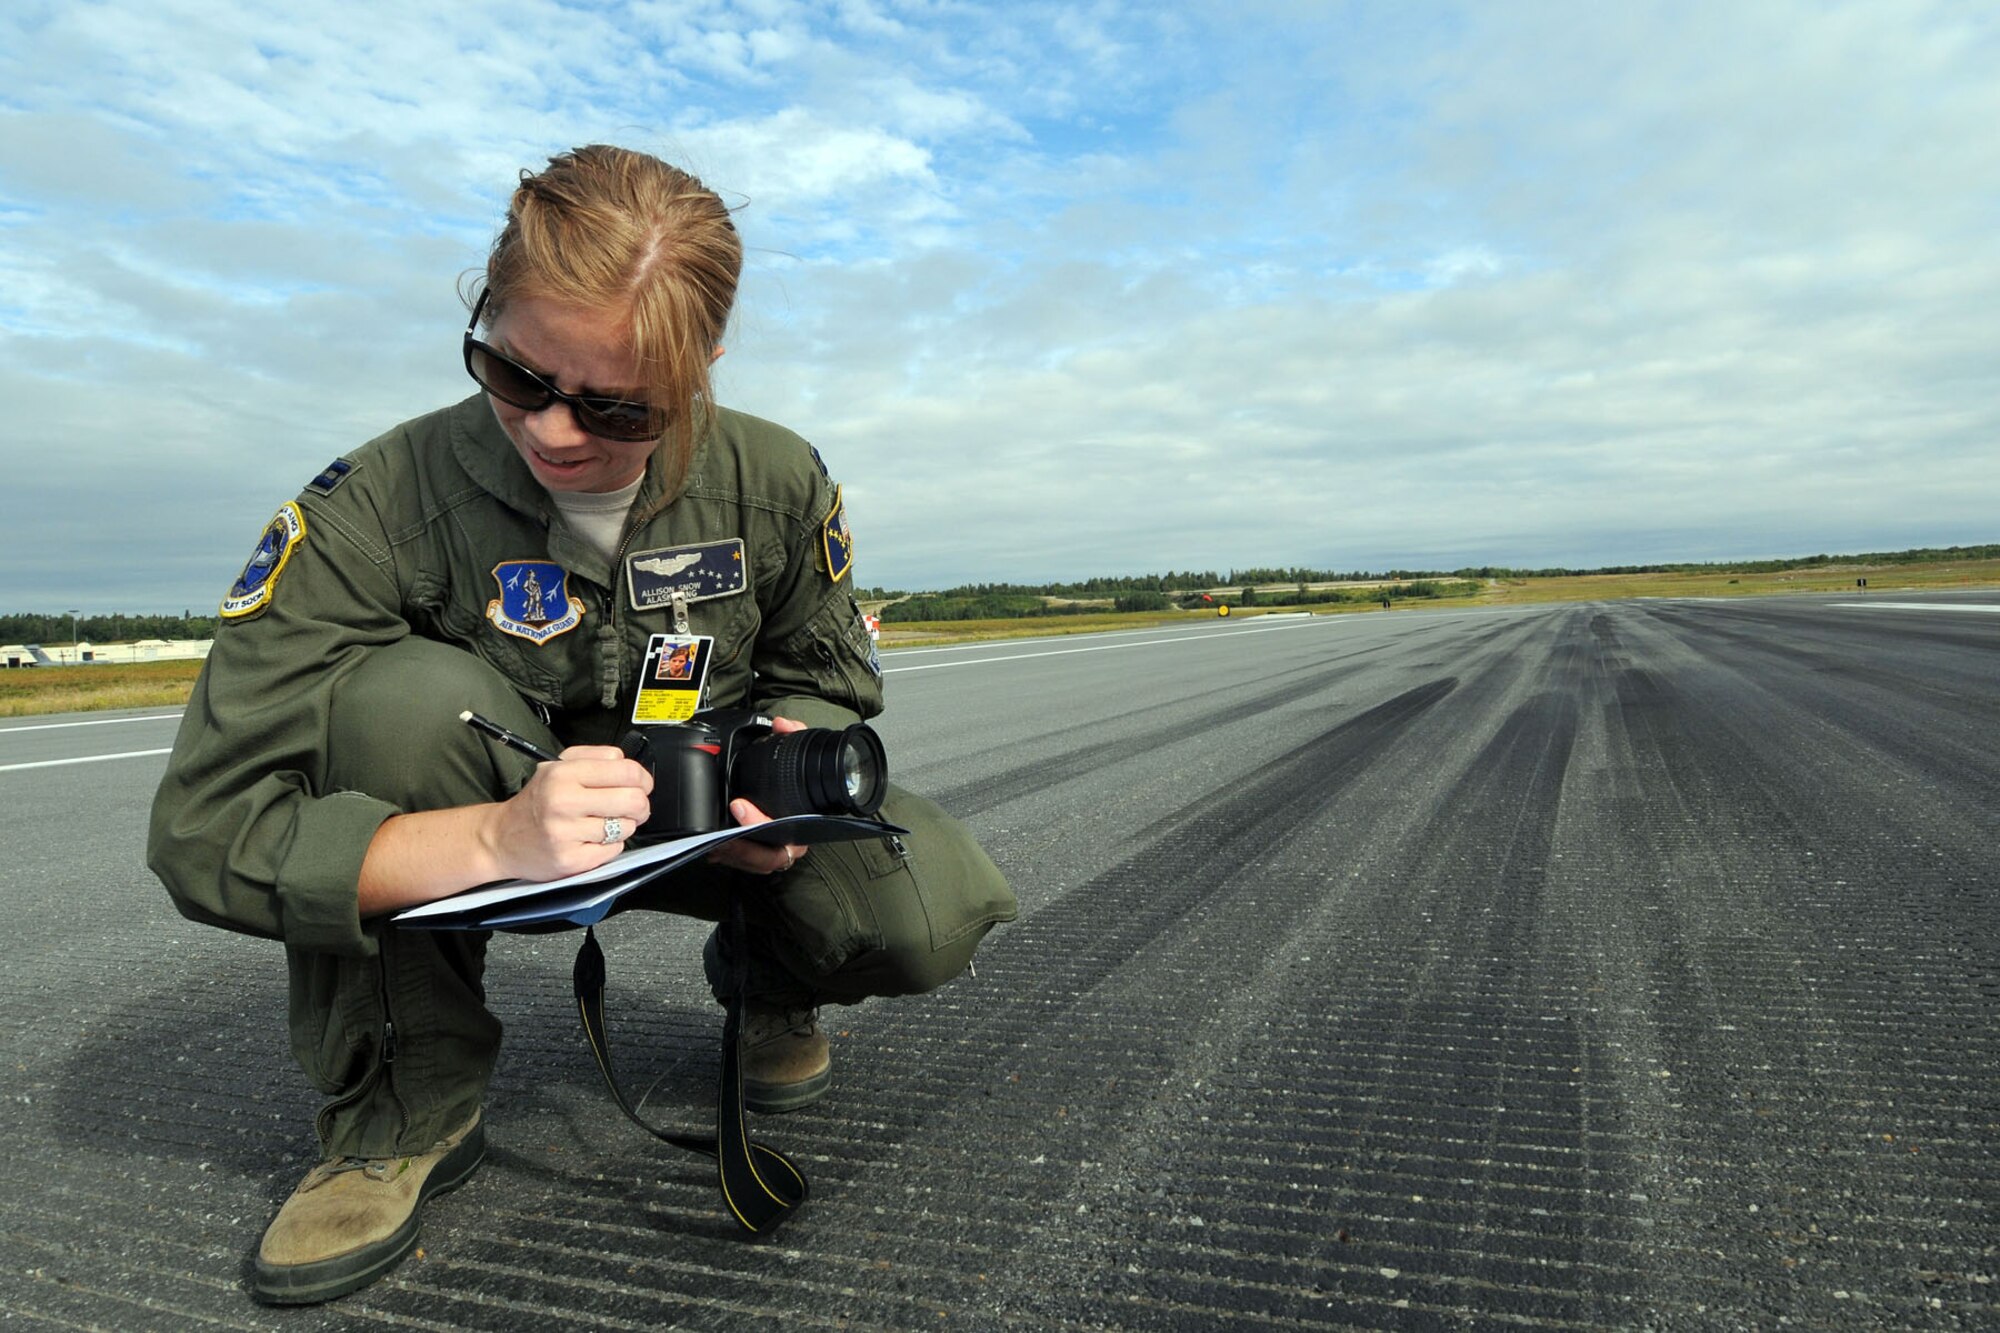 JOINT BASE ELMENDORF-RICHARDSON, Alaska - Capt. Allison Snow, a C-17 pilot with the Alaska Air National Guard's 249th Airlift Squadron measures the accuracy of a C-17 landing on the flight line here Aug. 11, 2012. Snow was a lead judge for aircraft landings in a "Moose Shoot" -- an airdrop and landing competition between the 176th Wing's airlift squadrons as well as their active-duty Air Force associate units, the 517th and 537th airlift squadrons. (National Guard Photo by Tech. Sgt. Jennifer Theulen)